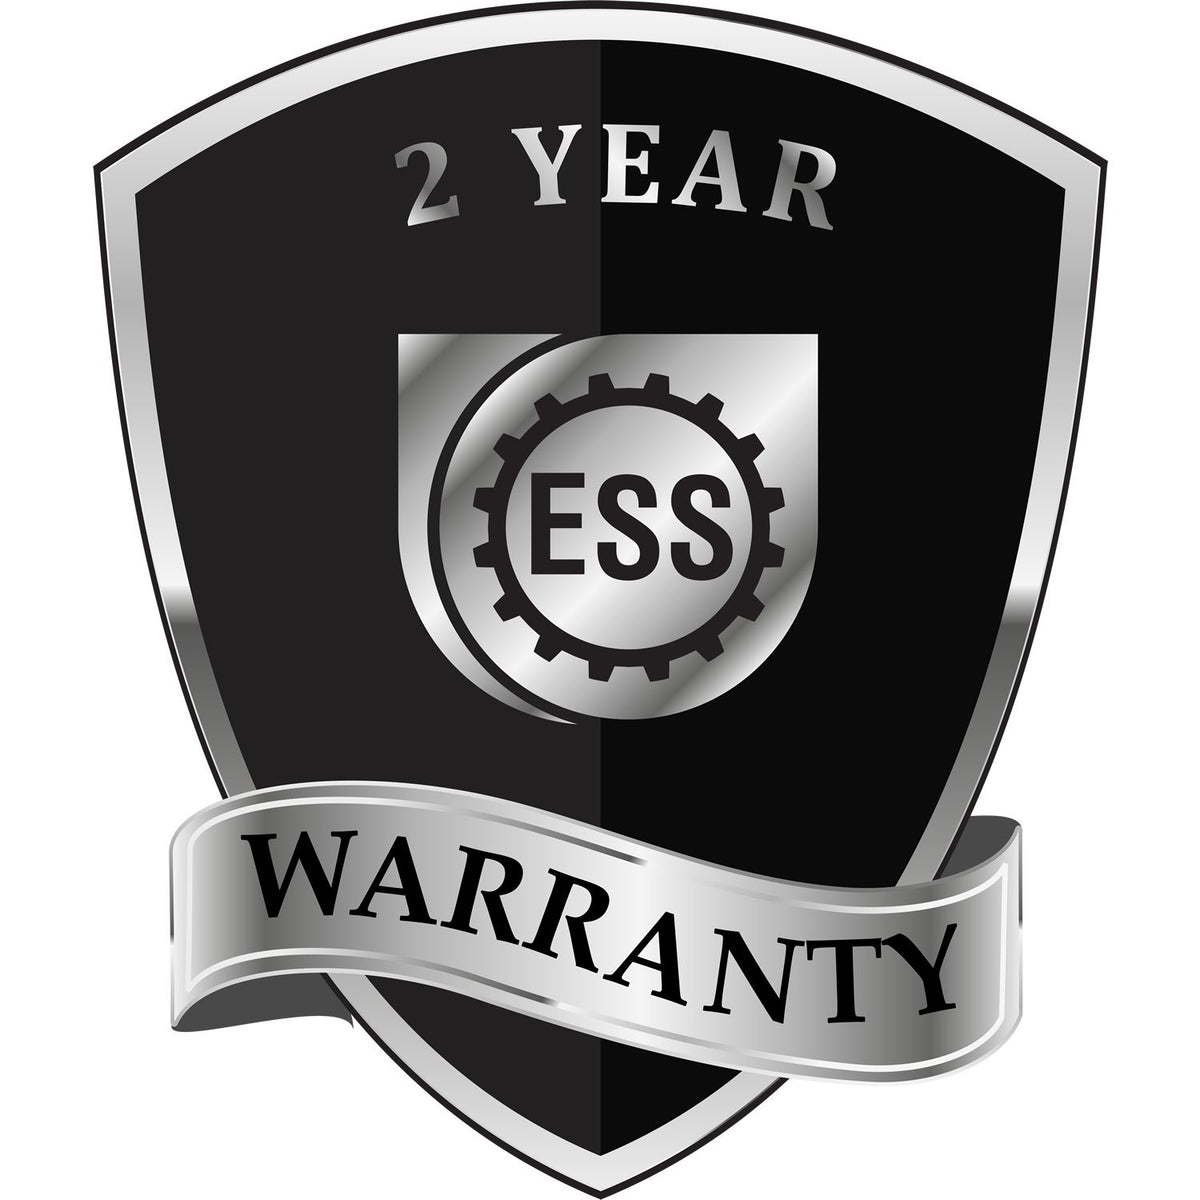 A badge or emblem showing a warranty icon for the State of Florida Extended Long Reach Engineer Seal